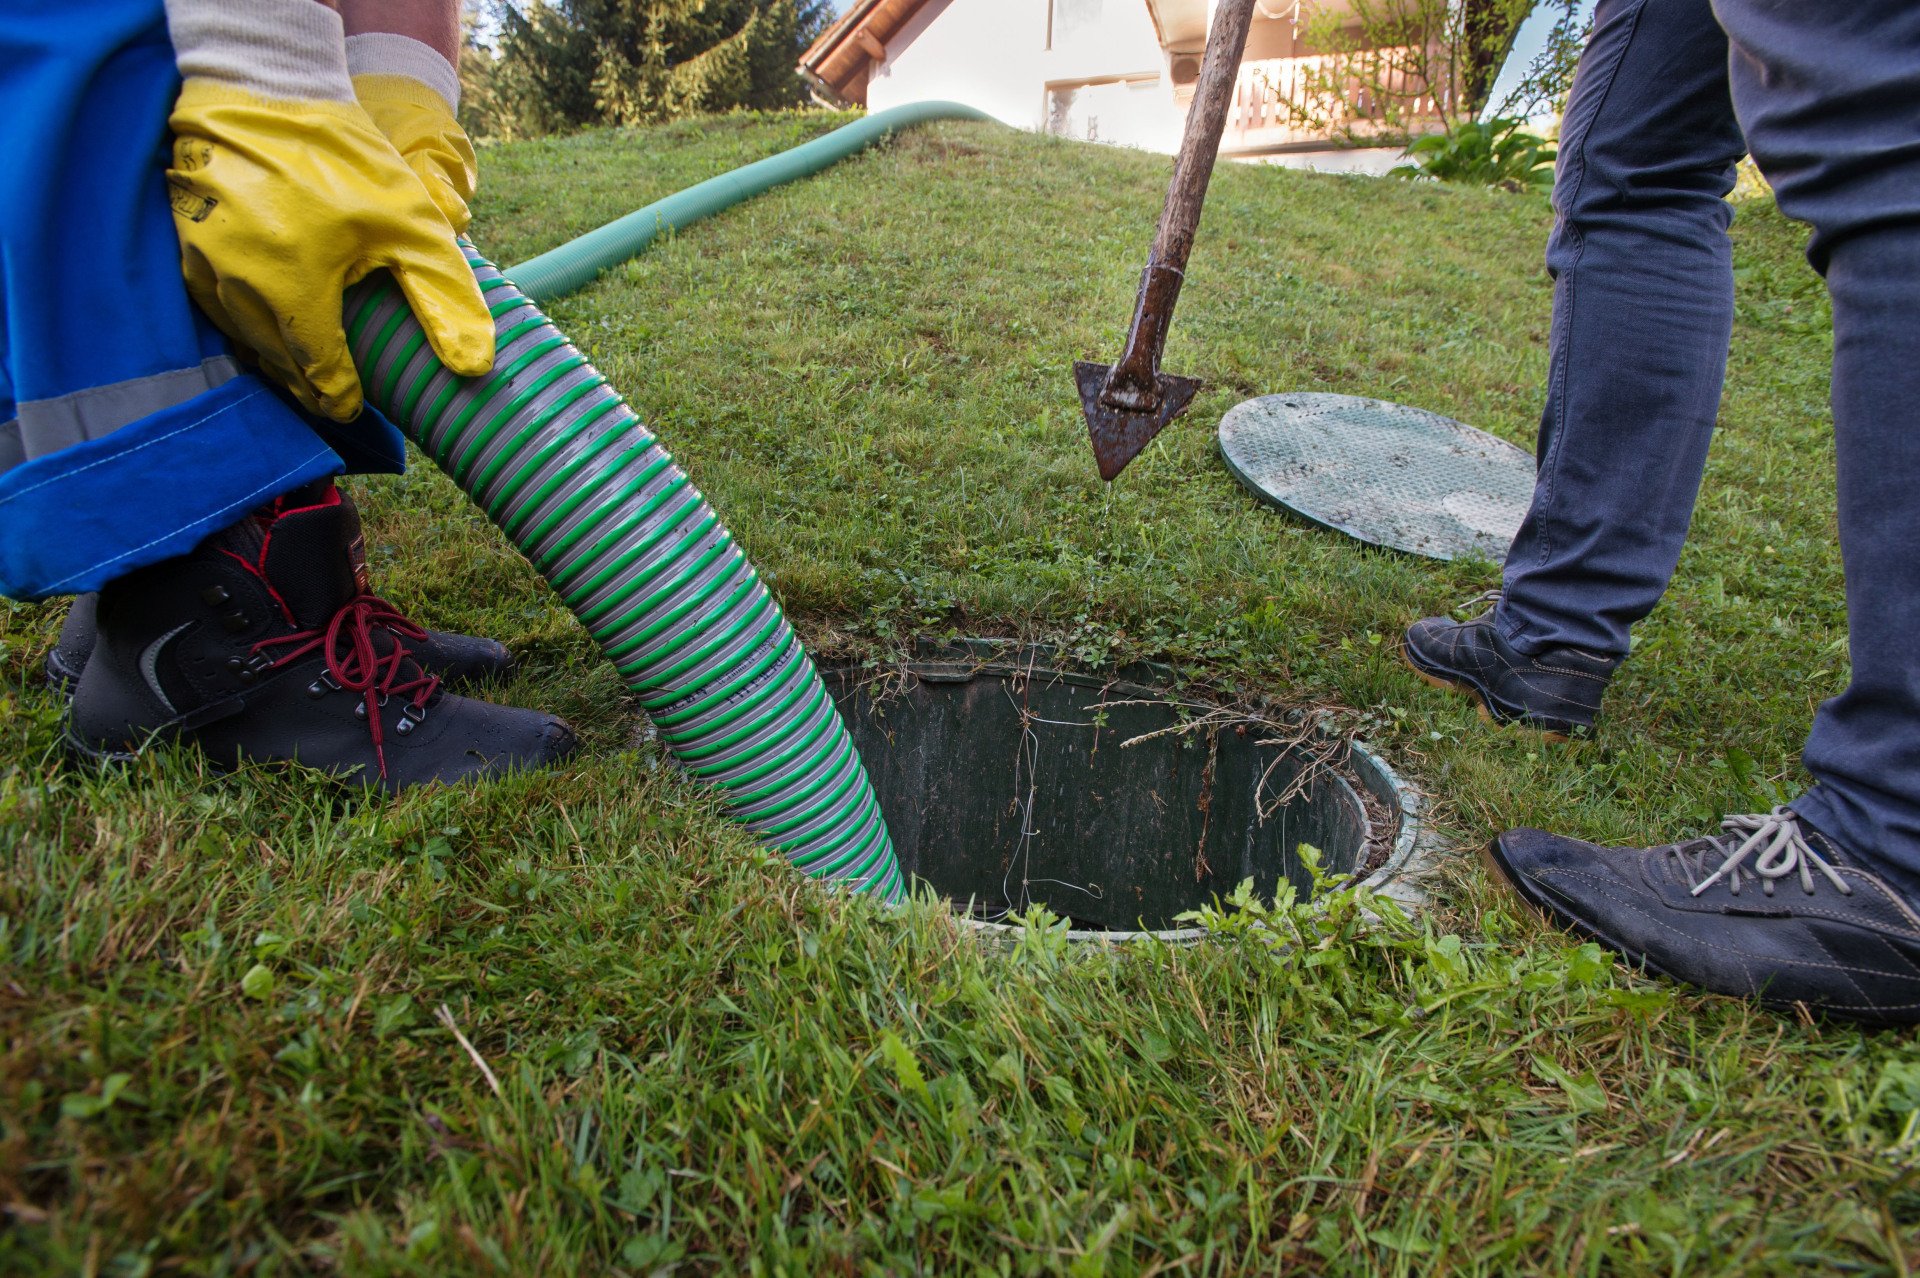 Drain Cleaning Solutions